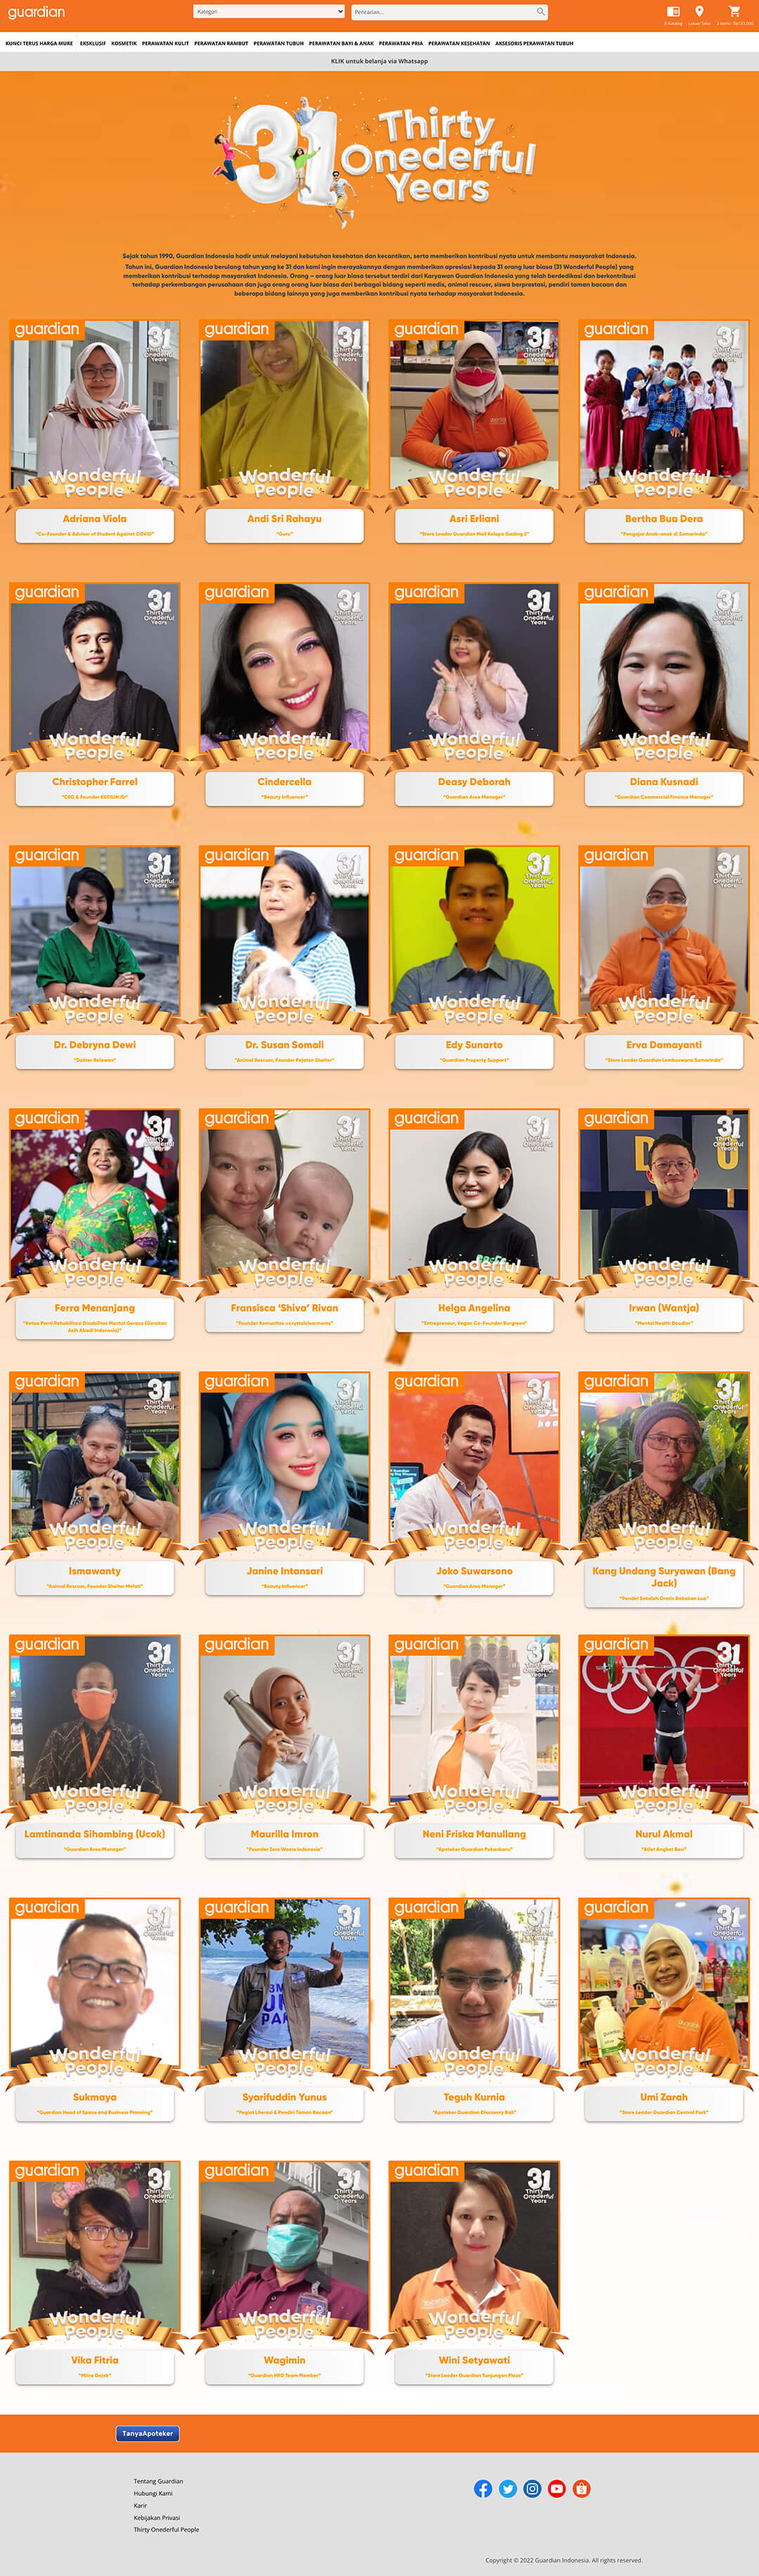 guardian indonesia category thirty onederful people